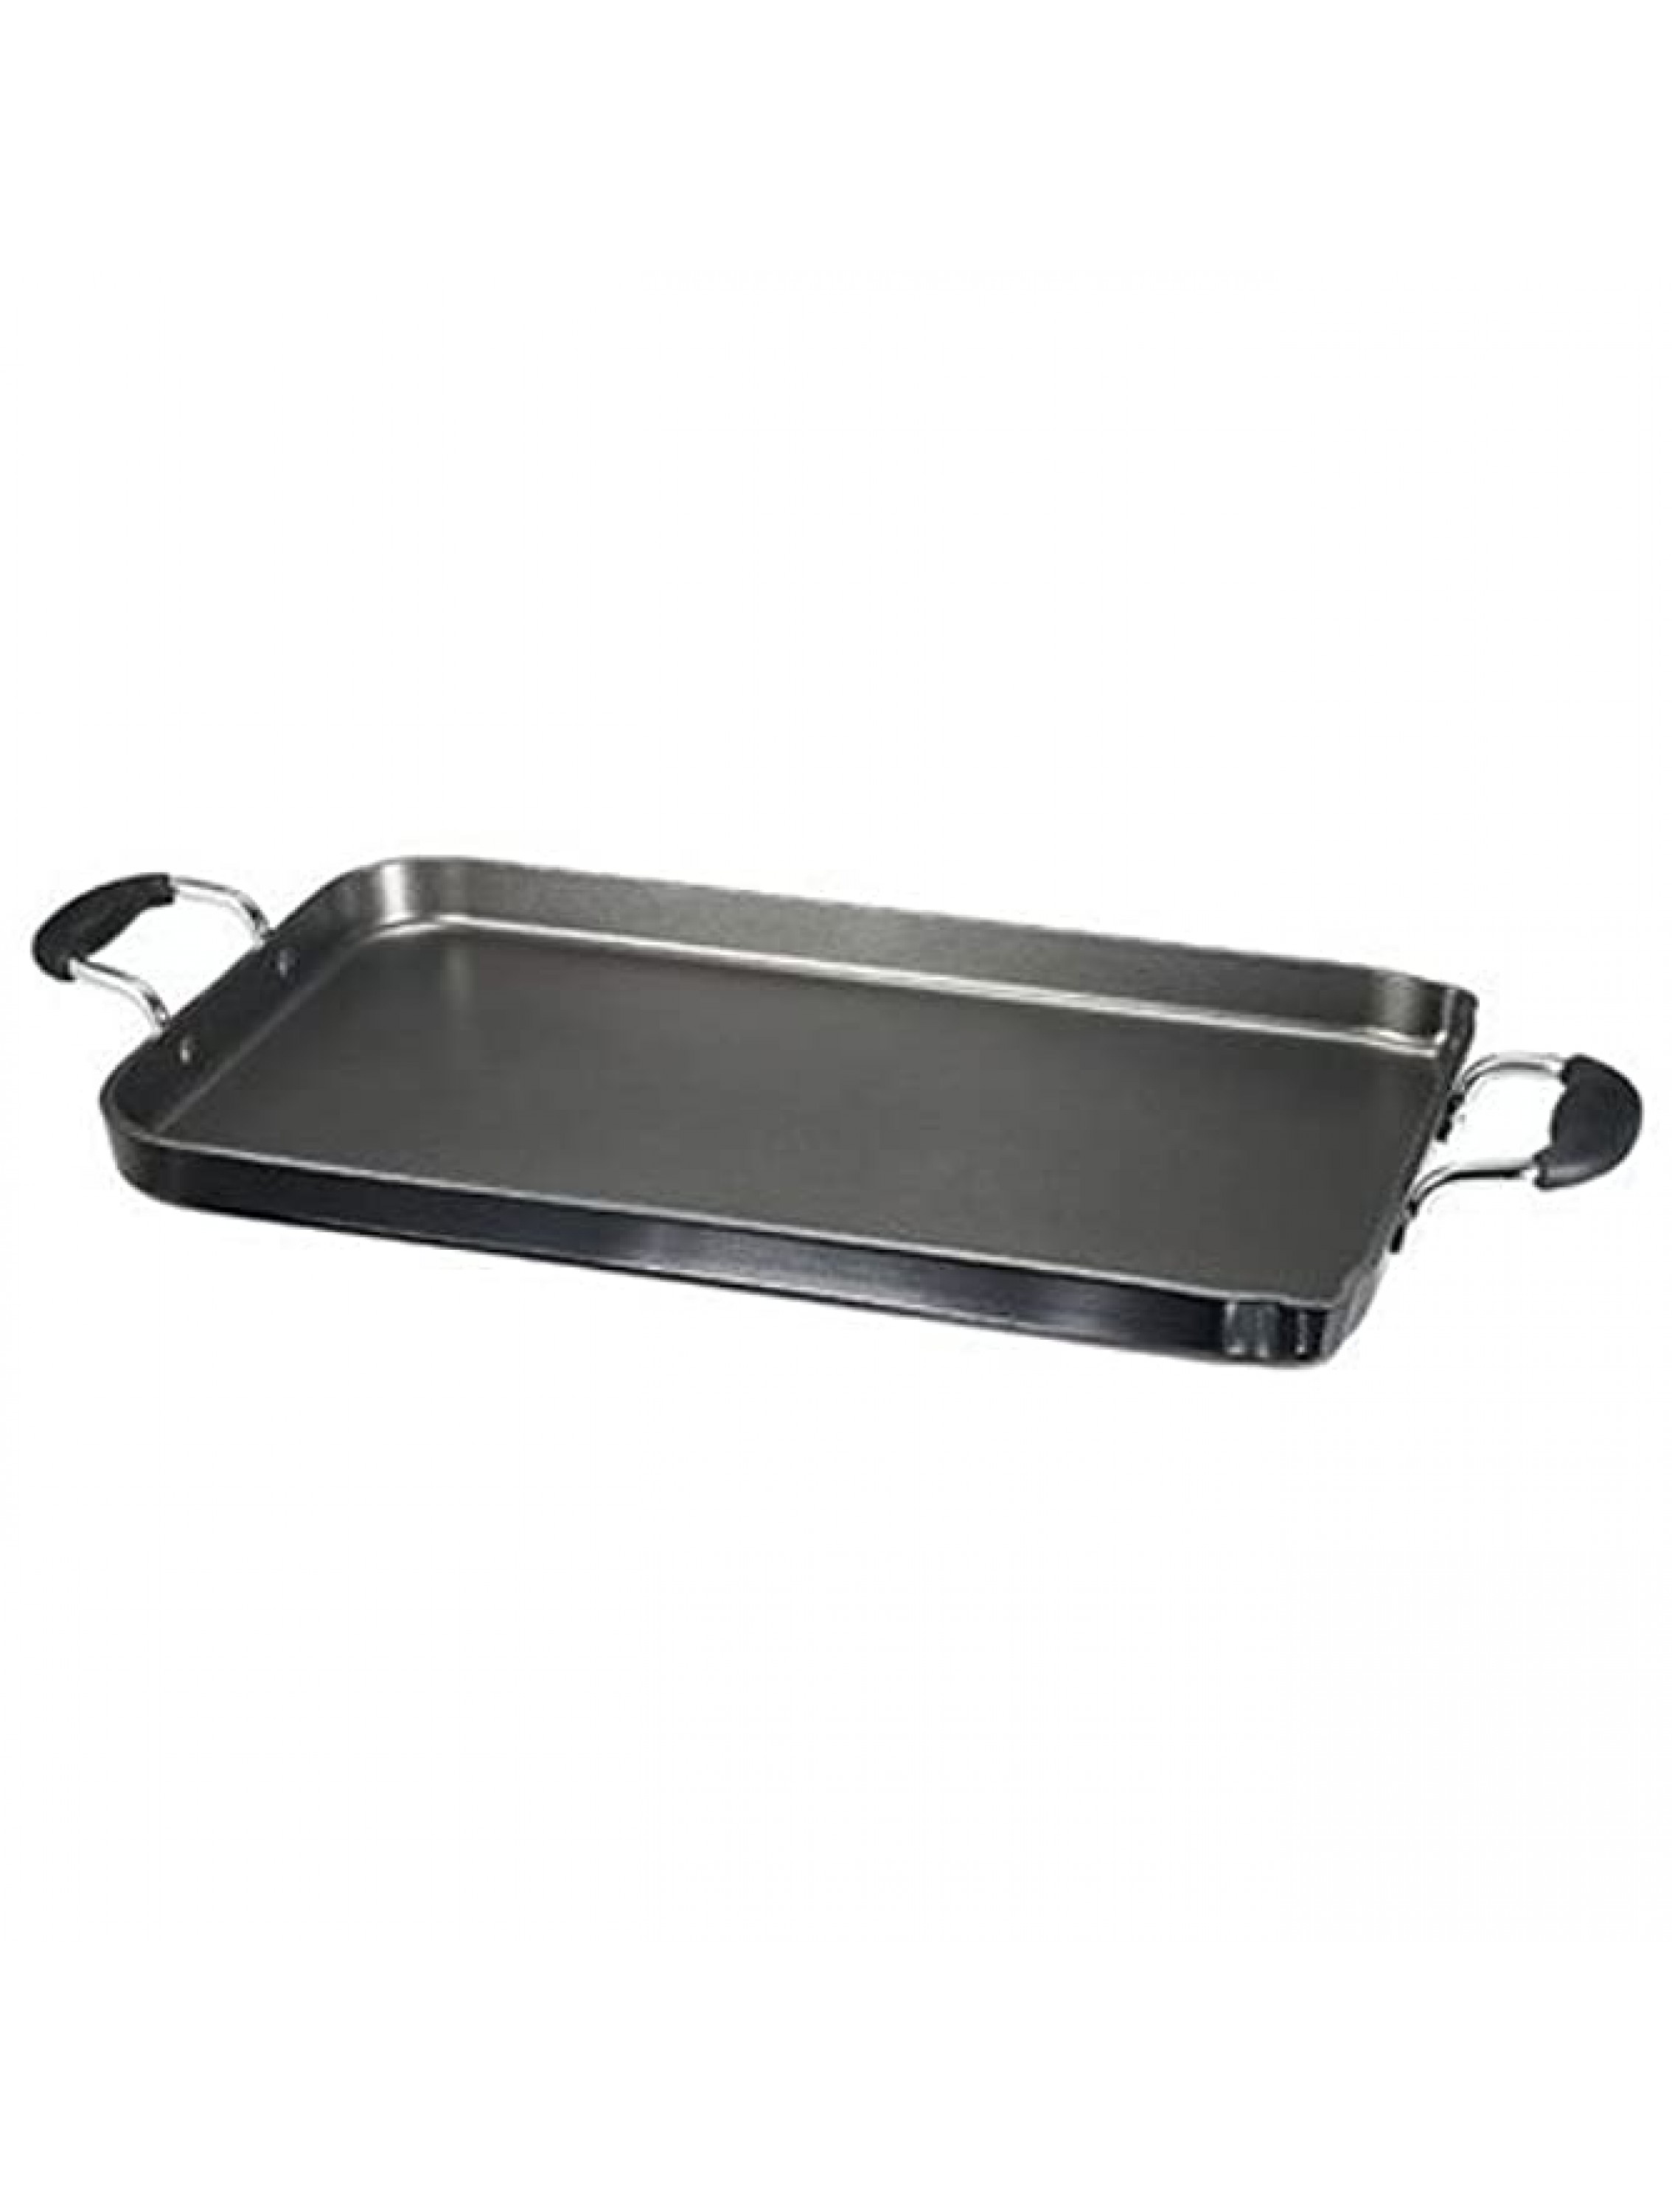 T-fal A92114 C4061484 Specialty Nonstick Dishwasher Safe 18-Inch x 11-Inch Double Burner Family Griddle Cookware 18-Inch Black - - BOOYDV4BQ